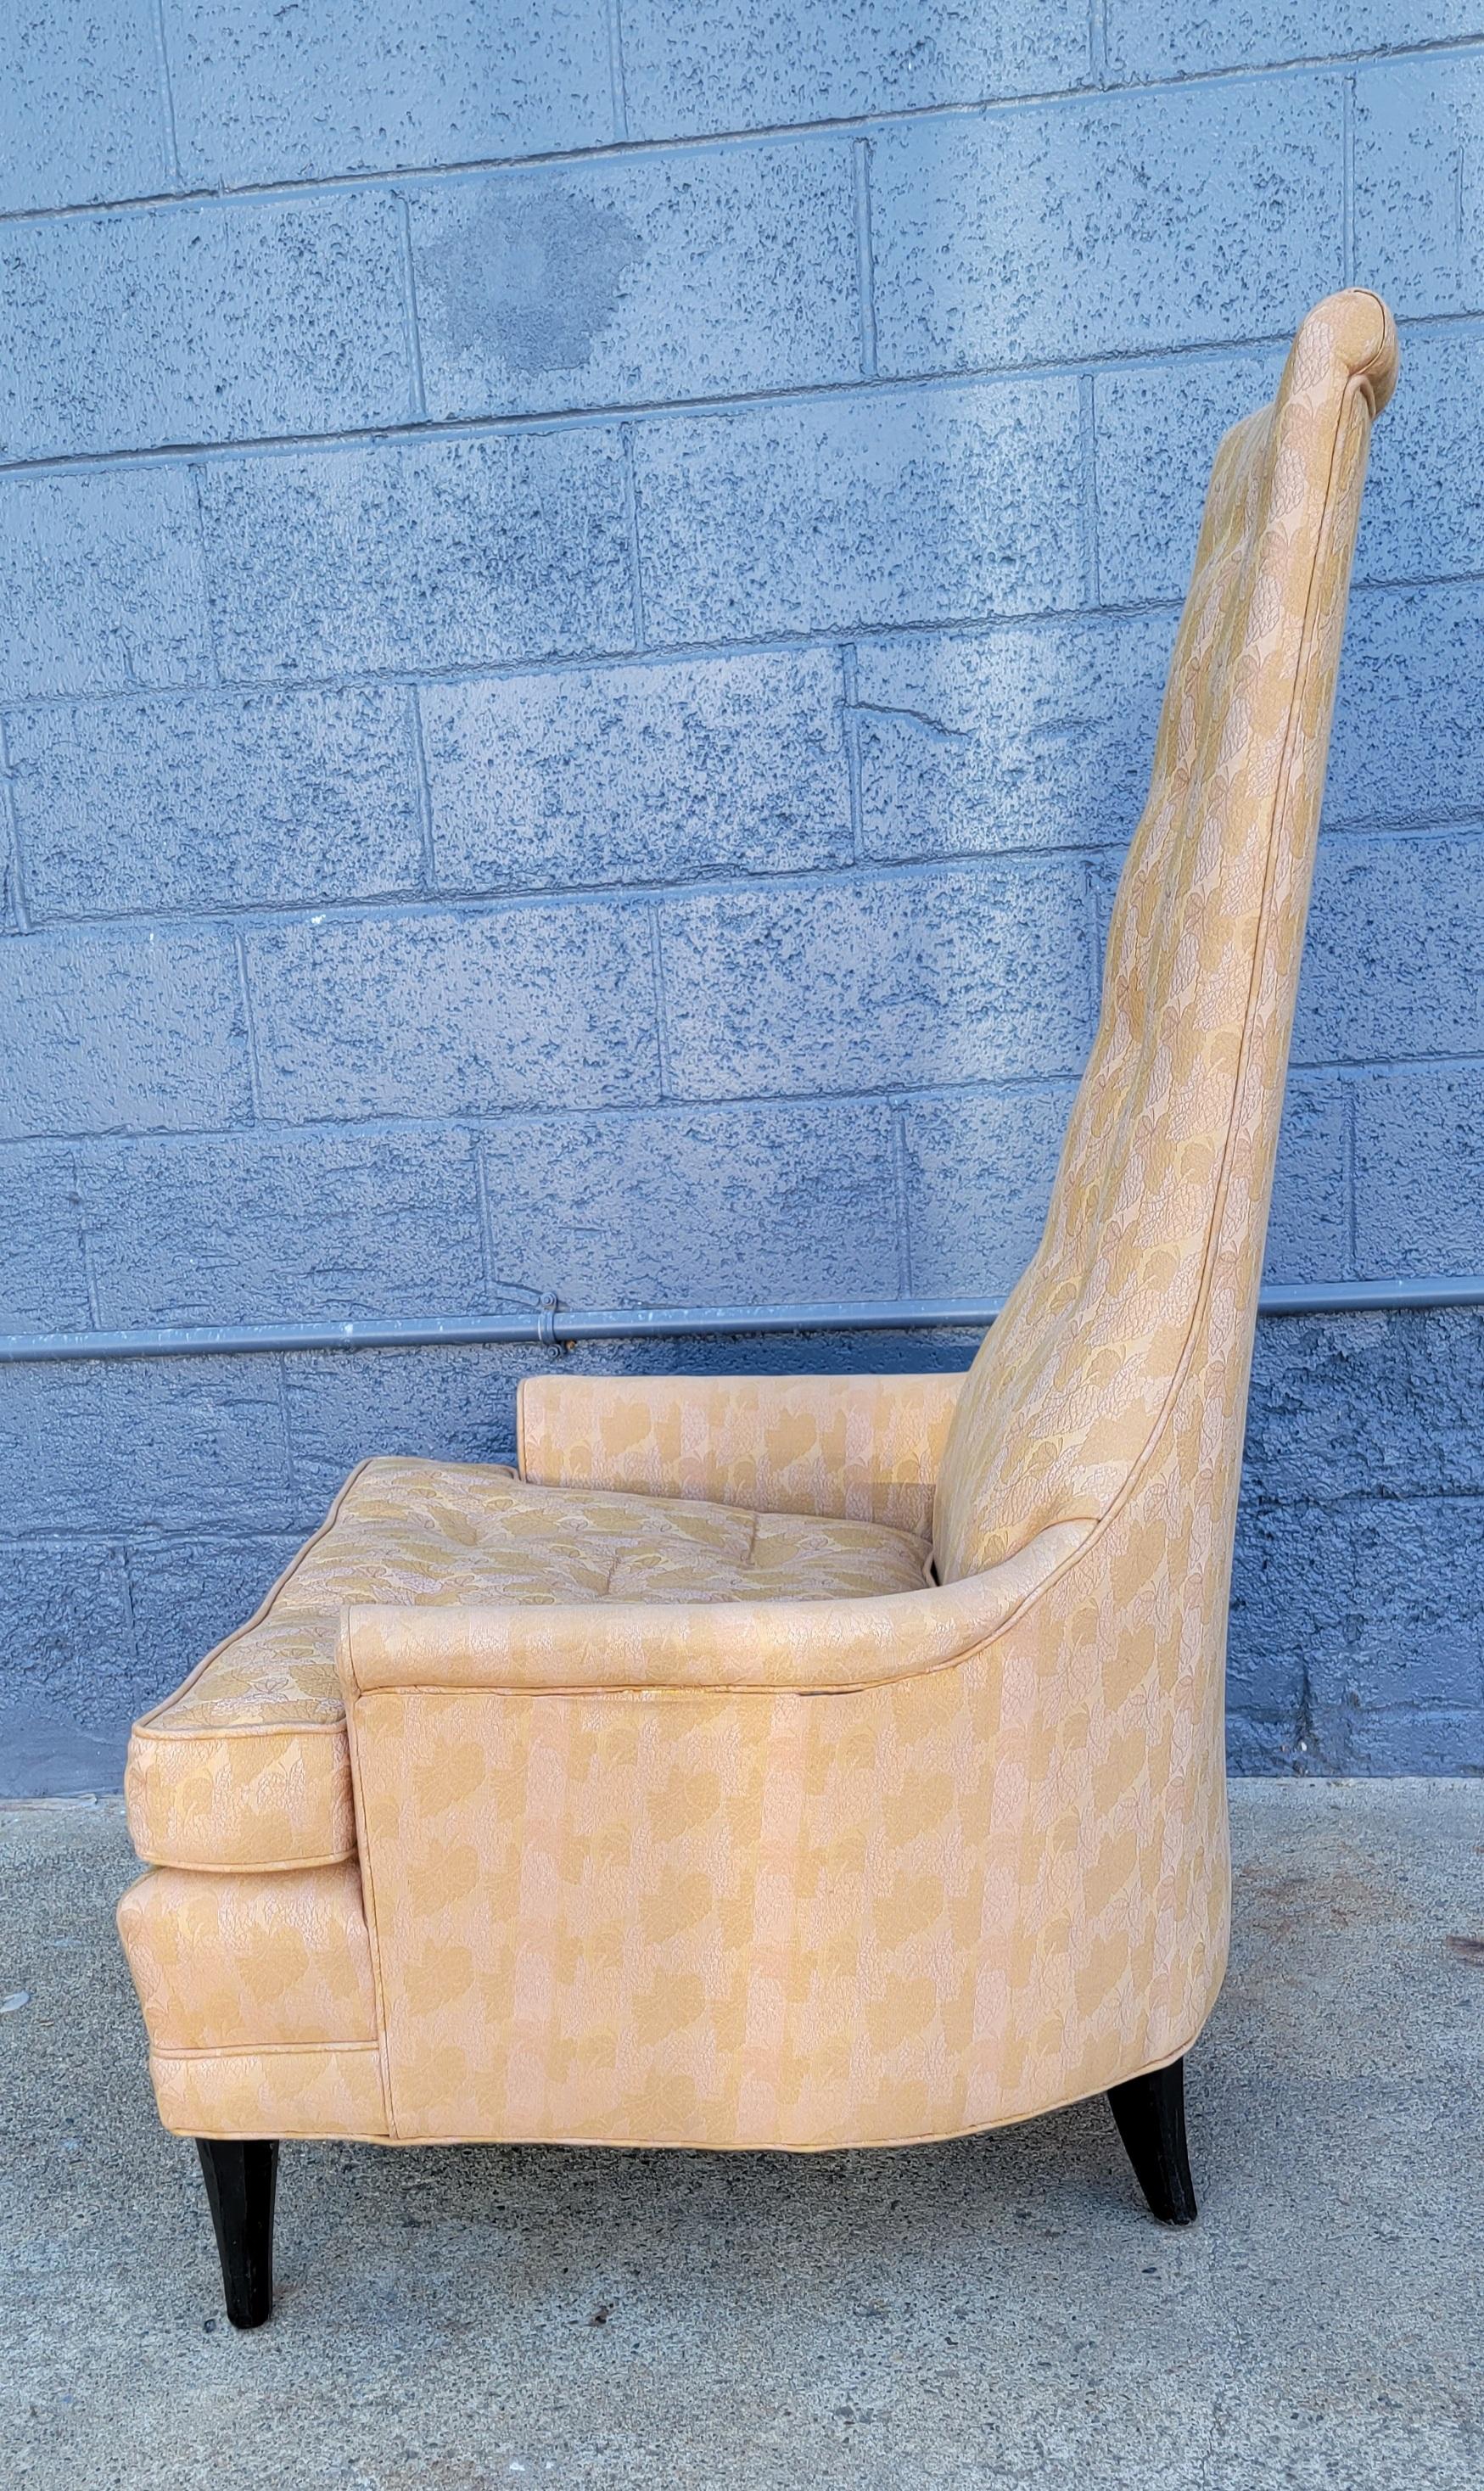 Classic 1950's Modern Hollywood Regency high-back lounge chair. Designed in the manner of Adrian Pearsall. Reversible seat cushion. Appears to be an older re-upholstery in excellent vintage condition.